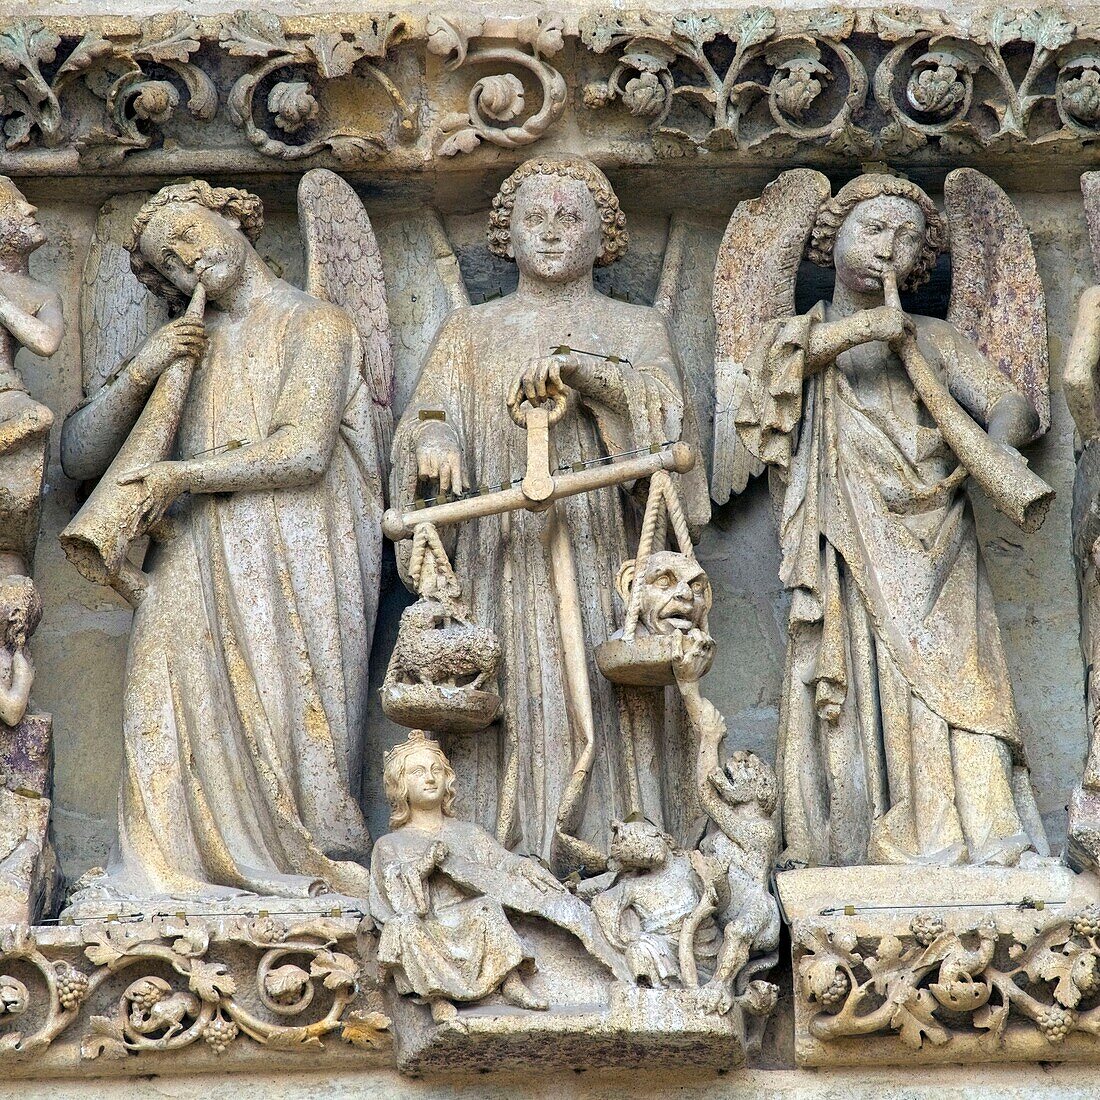 France,Somme,Amiens,Notre-Dame cathedral,jewel of the Gothic art,listed as World Heritage by UNESCO,central portal of the western facade,the Last Judgment